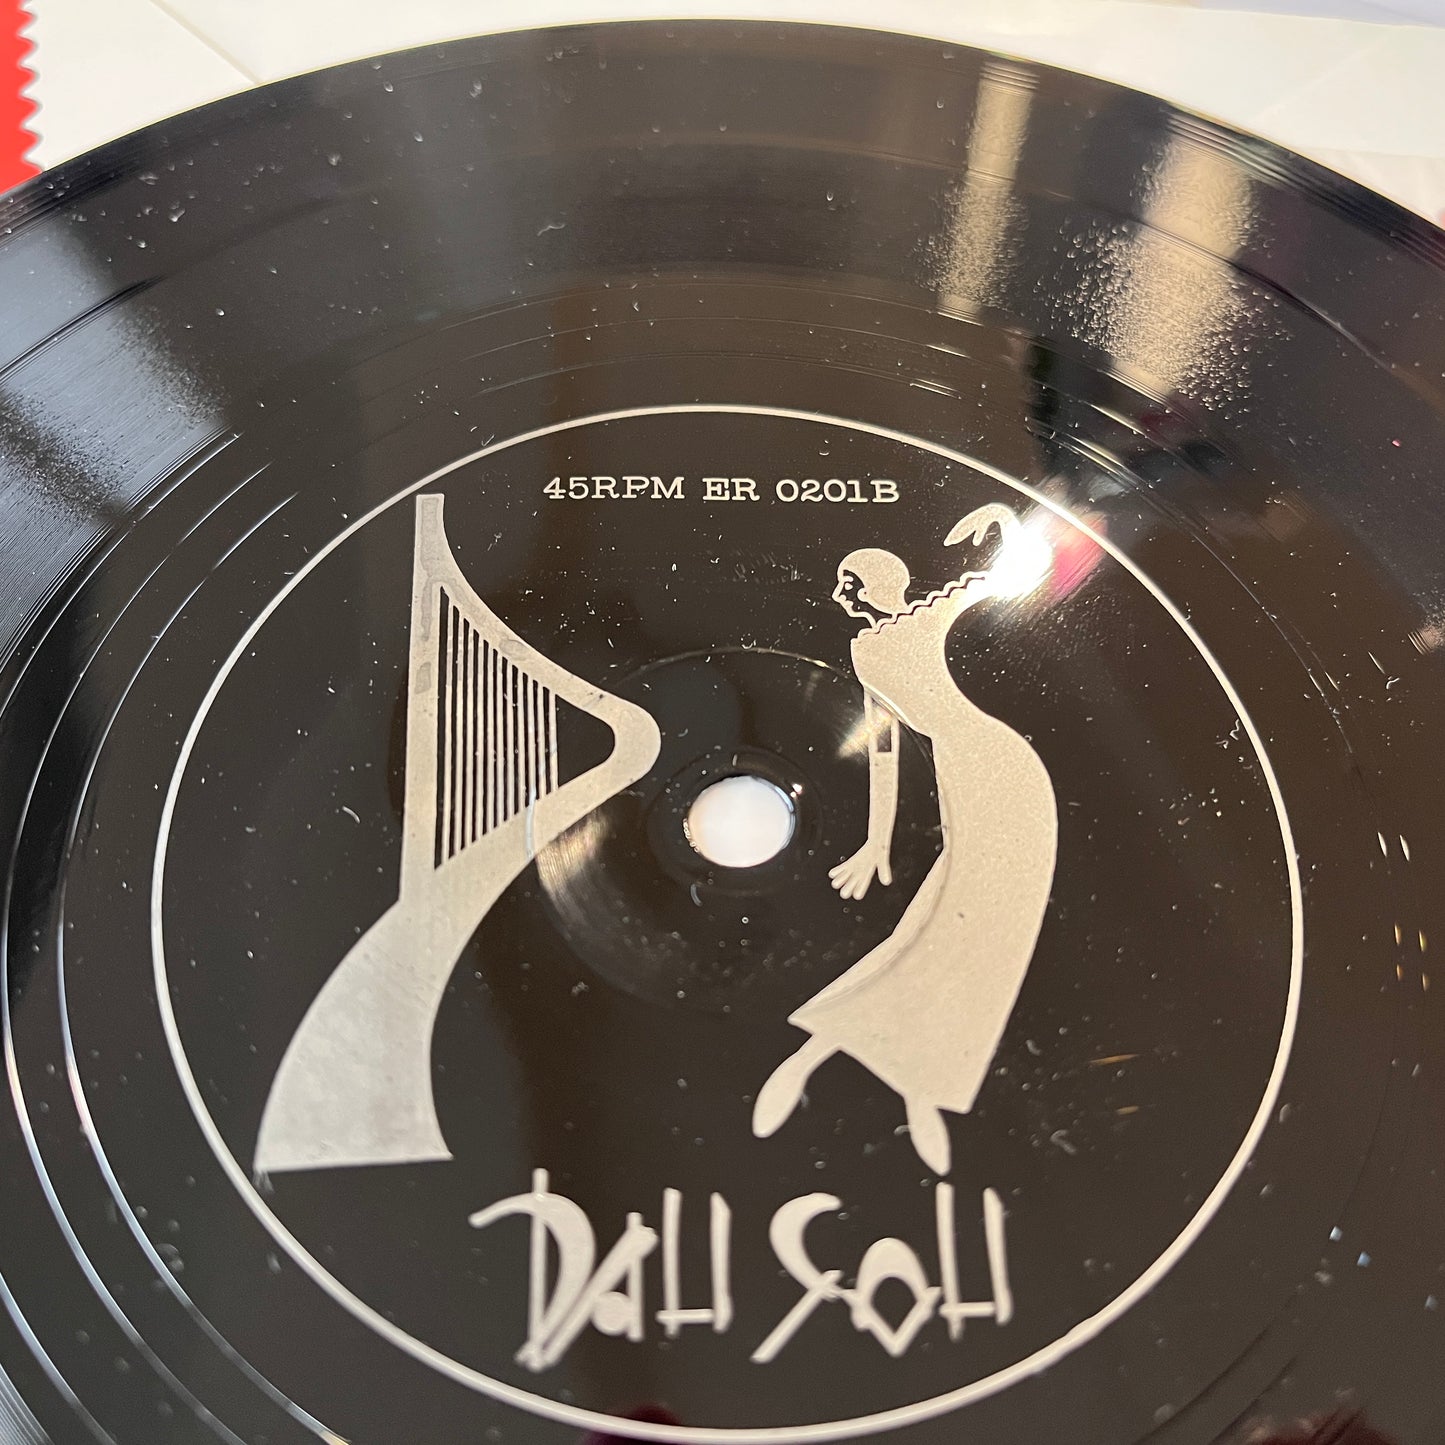 Dali Soli – Tinkle Clink Vox For You!?